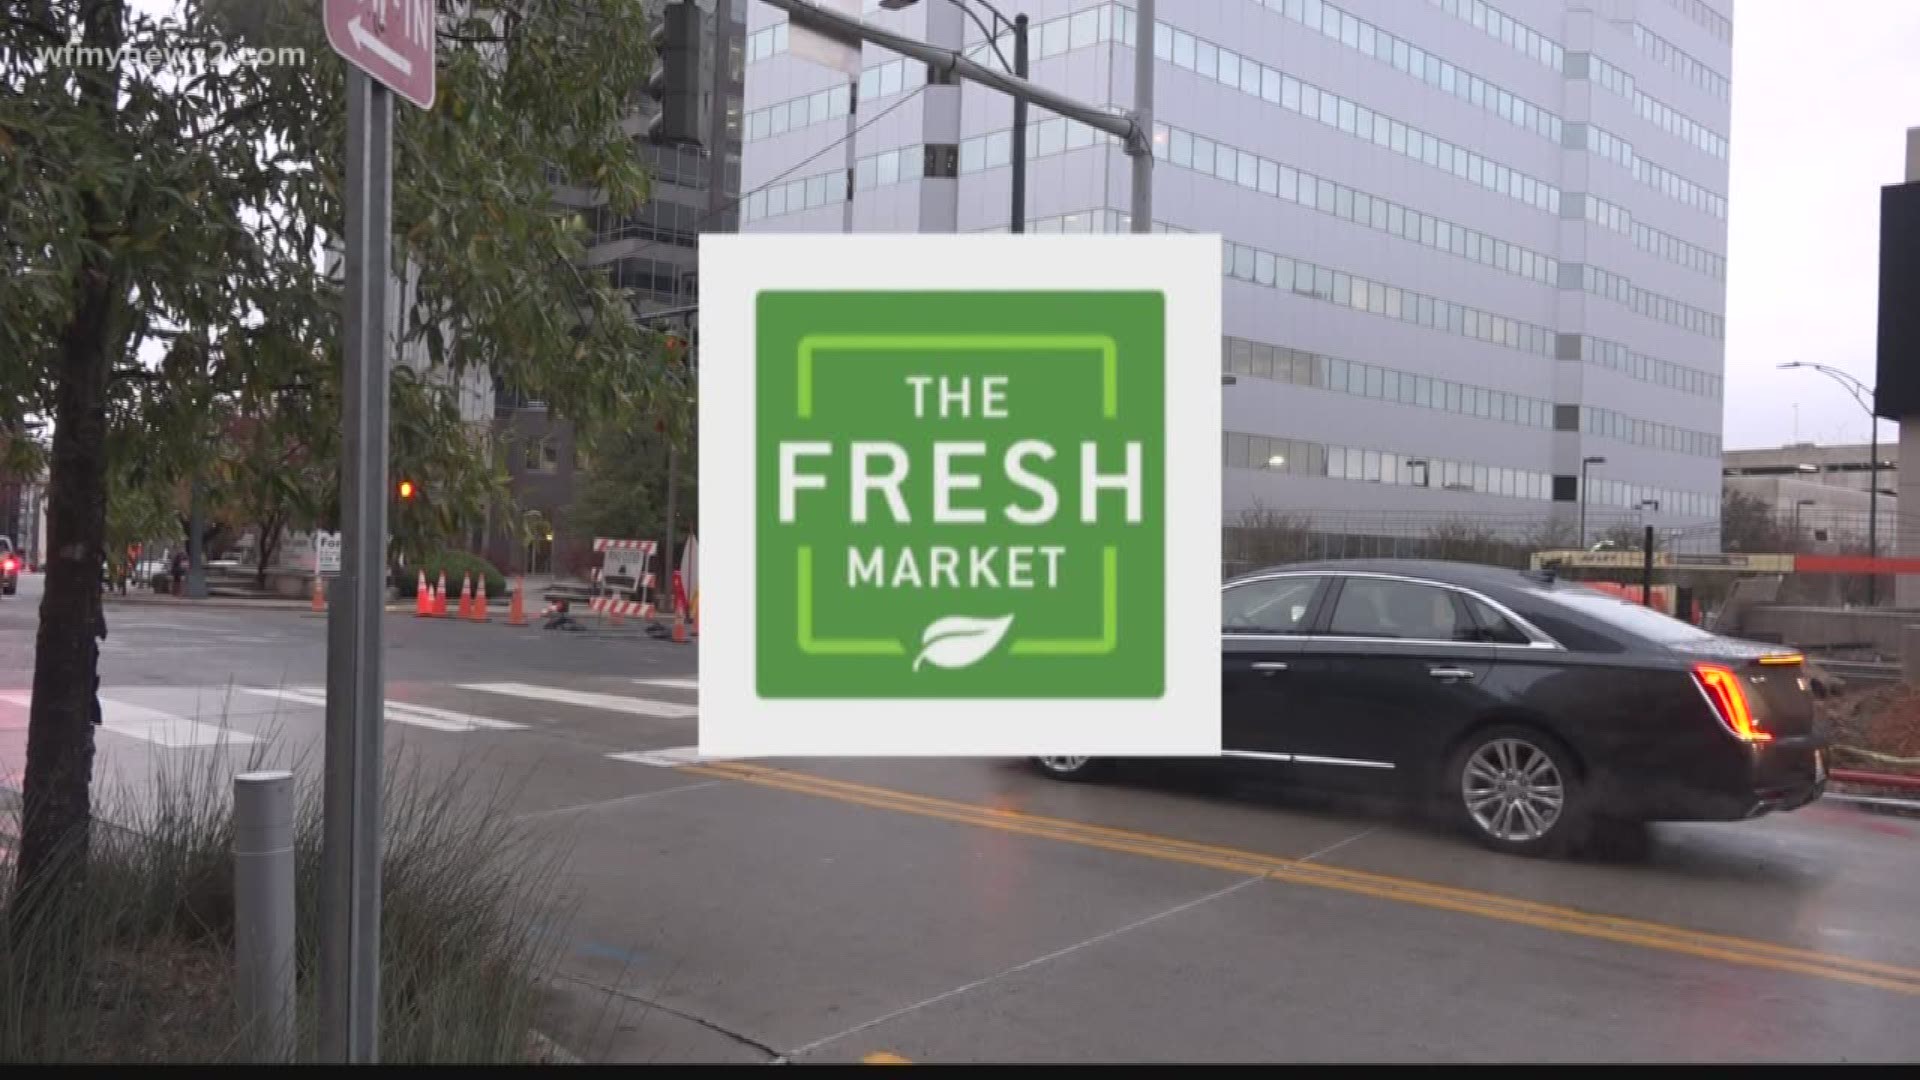 Greensboro-based grocery store "The Fresh Market" was exploring its options in leaving the city before local leaders stepped in with big incentives to keep it here